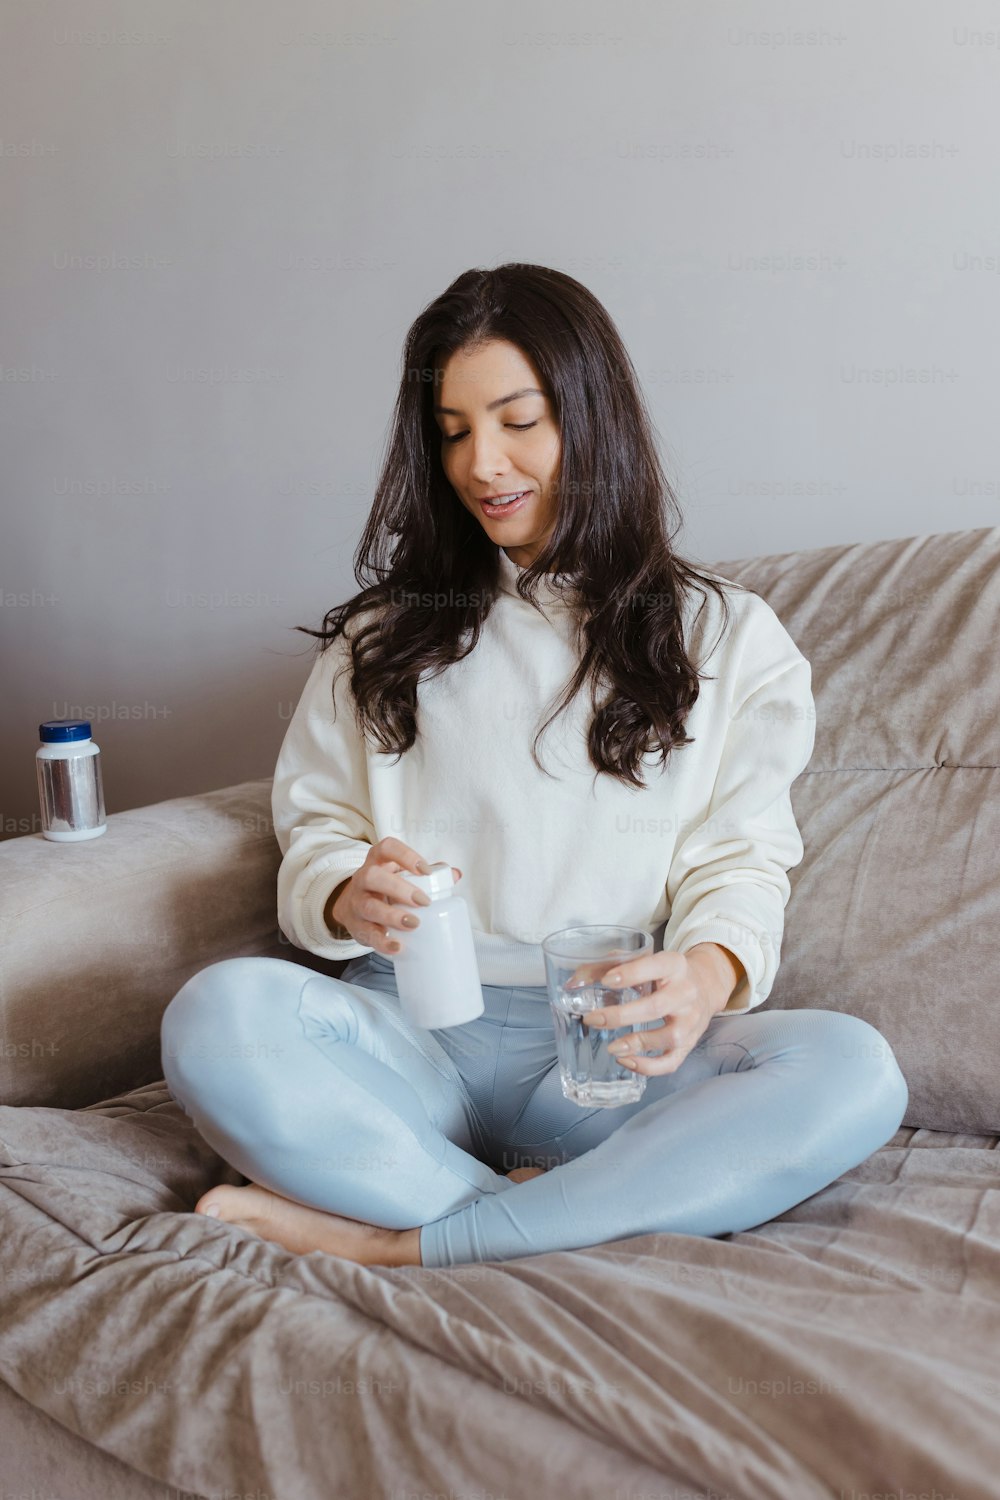 a woman sitting on a couch holding a bottle of water